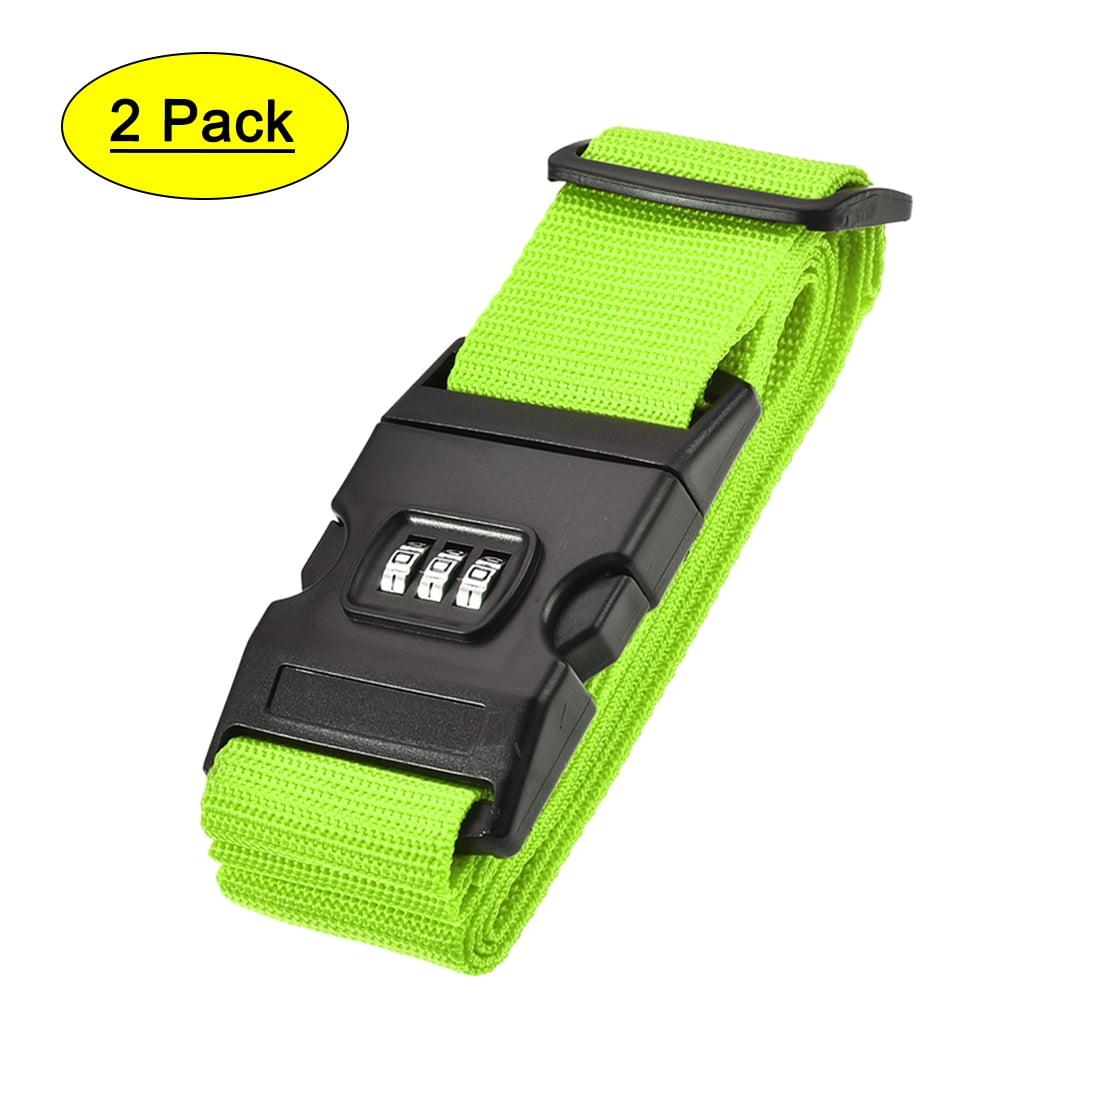 Packing Green - 12 PCS AMYIPO Luggage Straps 78 Inch Length x 1 inch Width Quick Release Buckle Straps Suitcase Belt for Travel Business Trip 